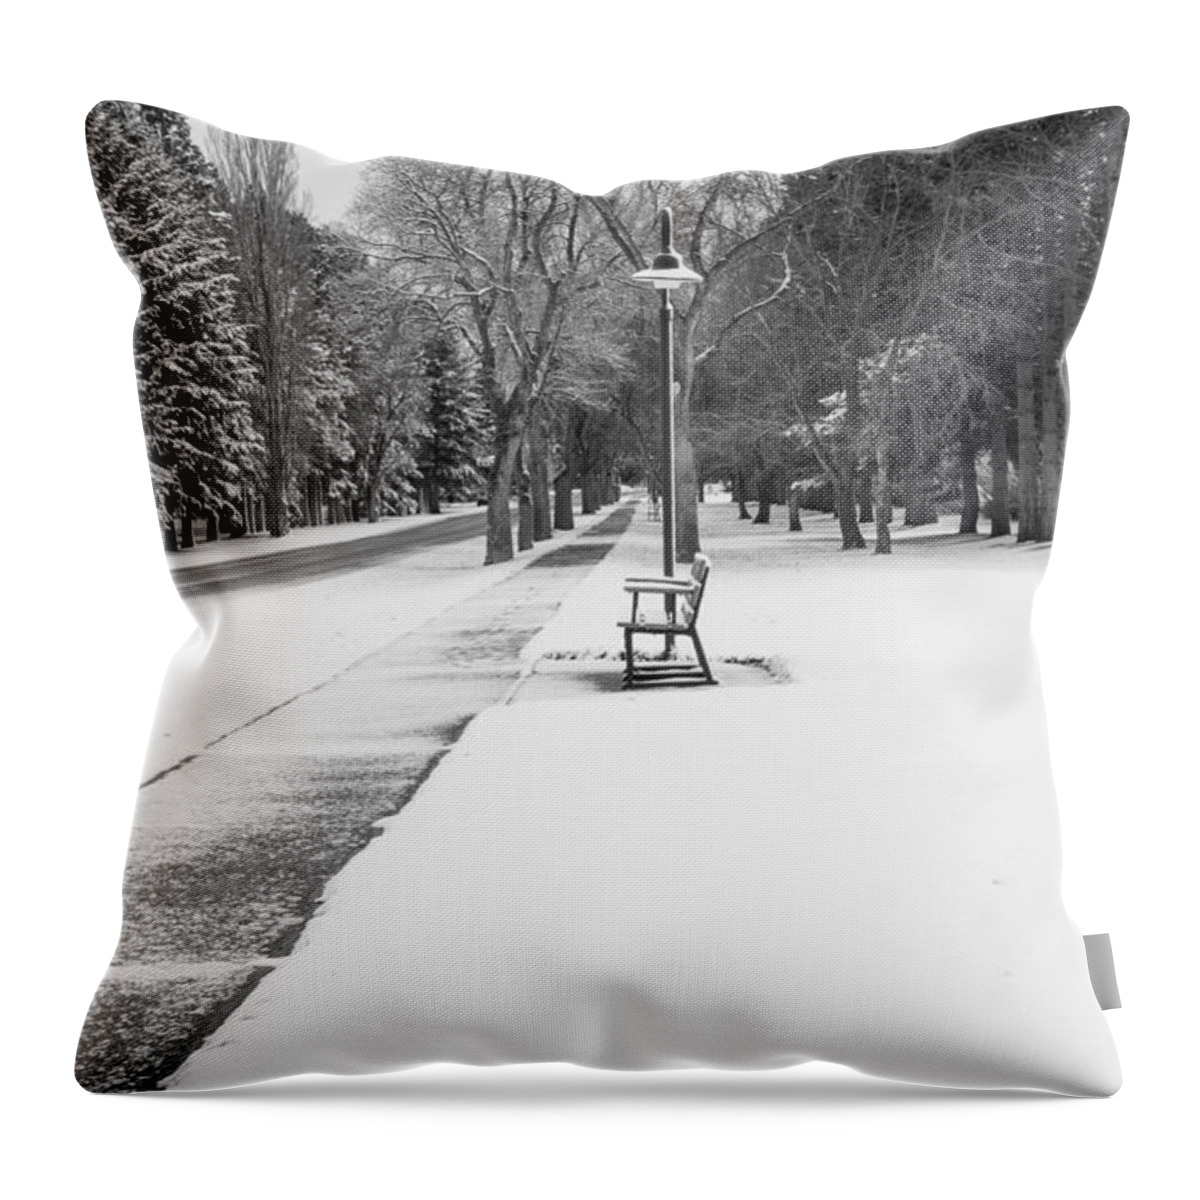 Sidewalk Throw Pillow featuring the photograph Winter Walk by Fran Riley